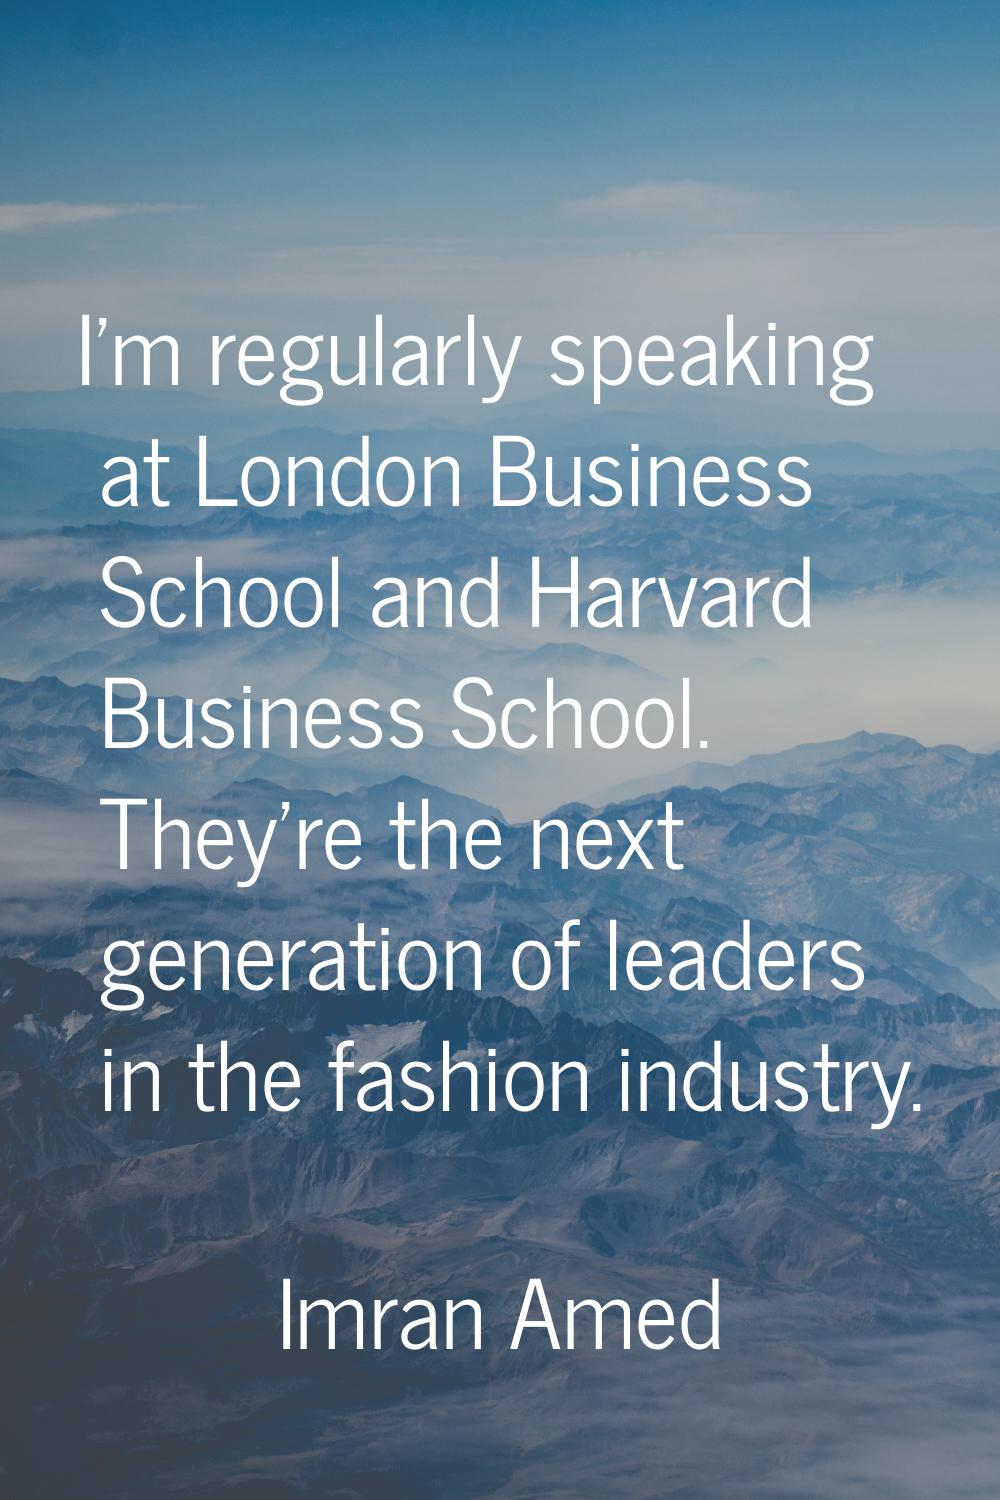 I'm regularly speaking at London Business School and Harvard Business School. They're the next gene